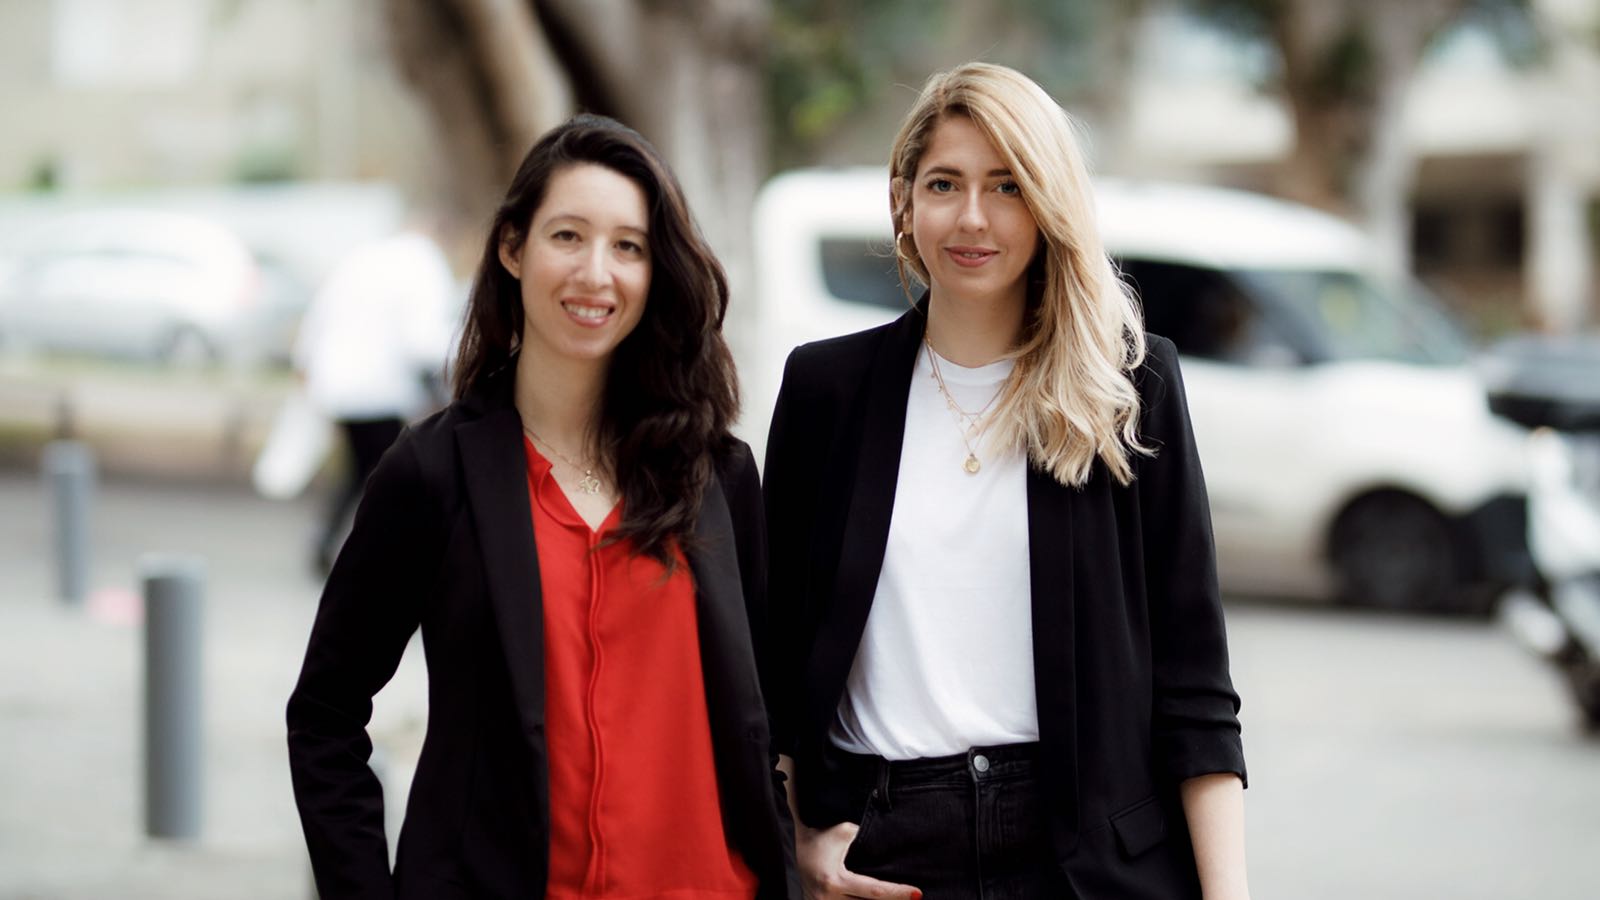 Yael Kochman (left) and Alla Foht (right) are the founders of Re: Tech, an innovation center in Tel Aviv for retail technology. Courtesy